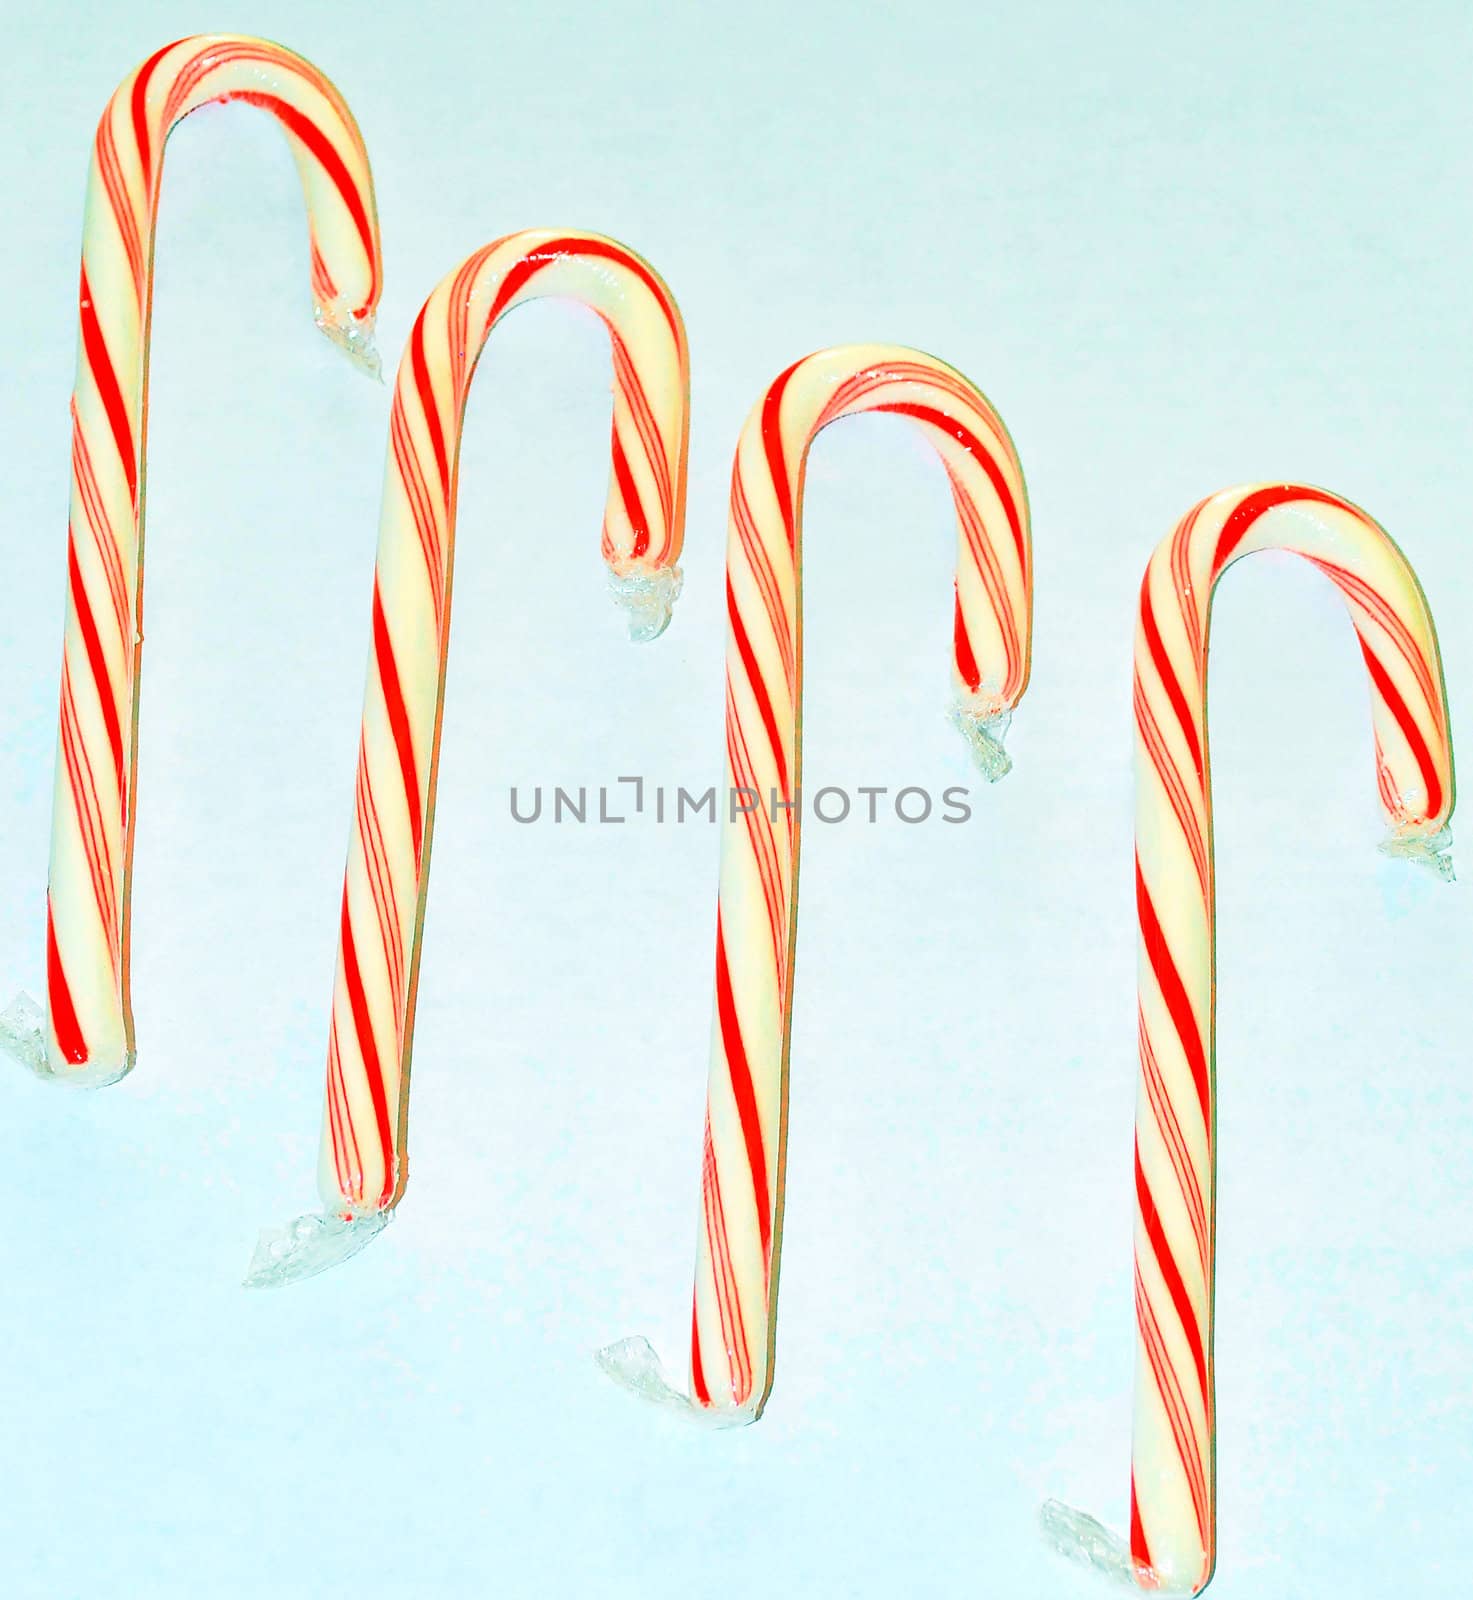 Candy canes on display for xmas.